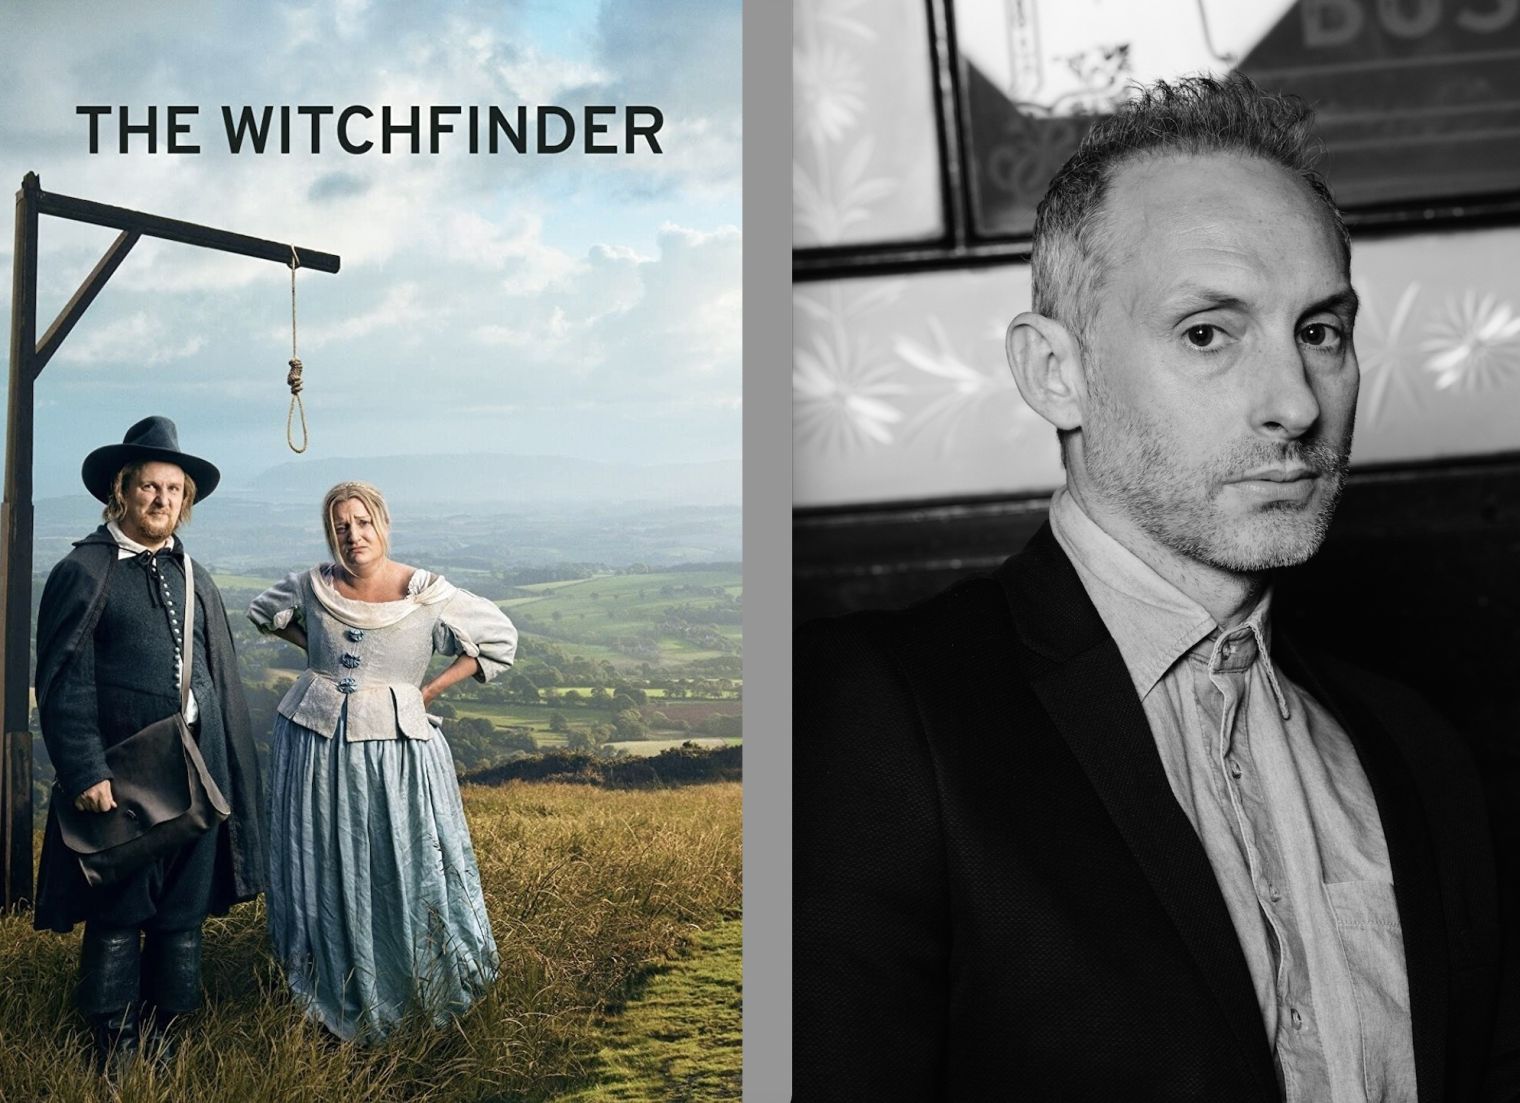 Karl Theobald guest stars  in tonight's episode of The Witchfinder